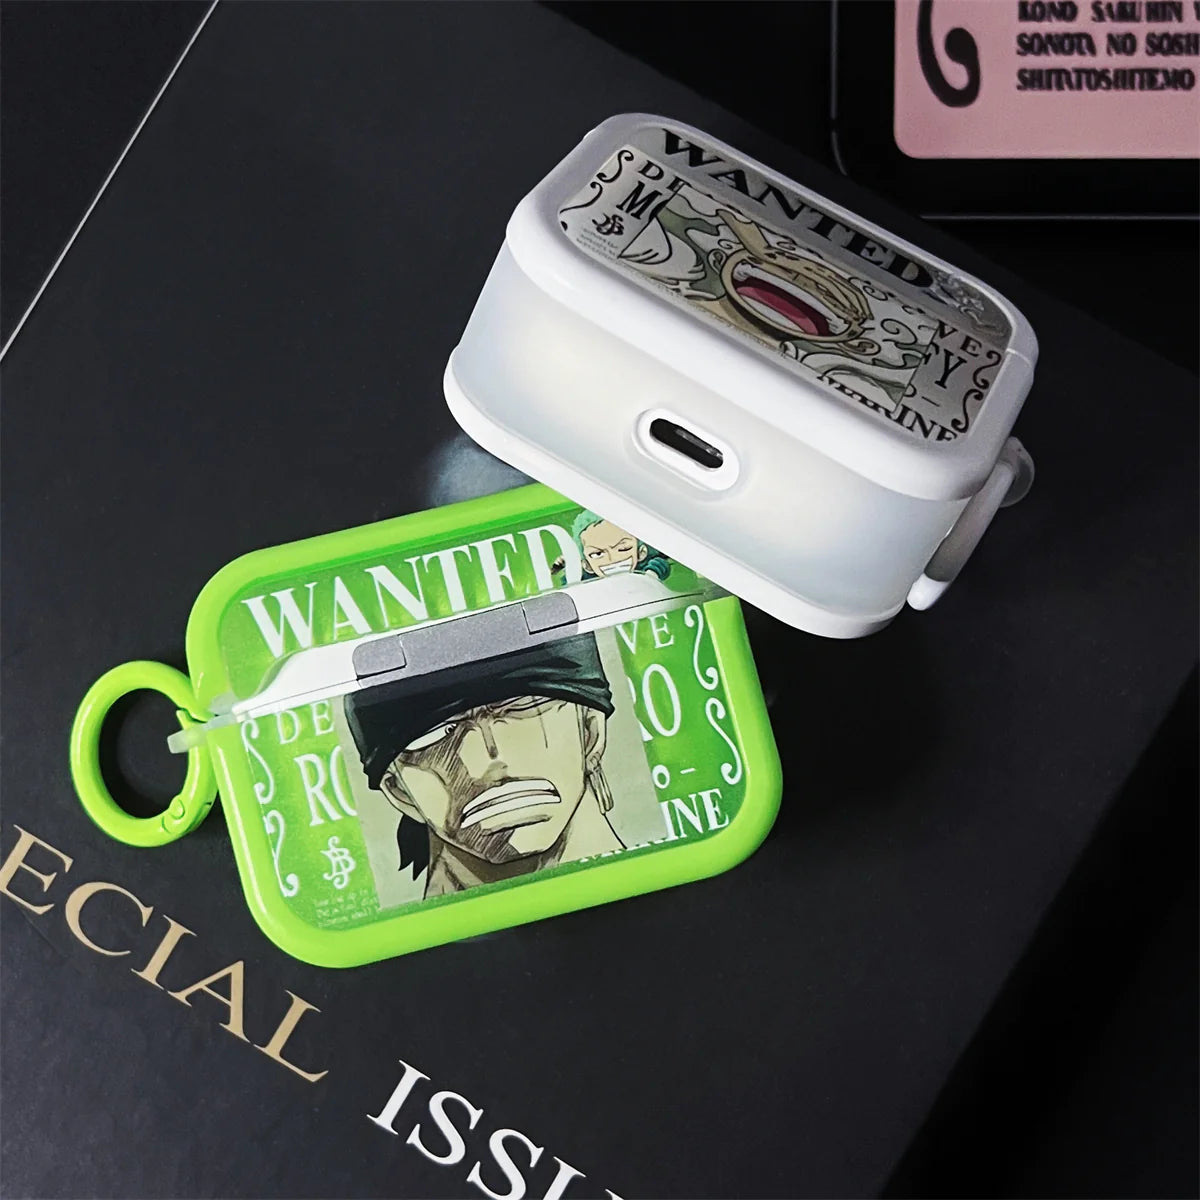 One Piece Wanted Poster Airpod Case